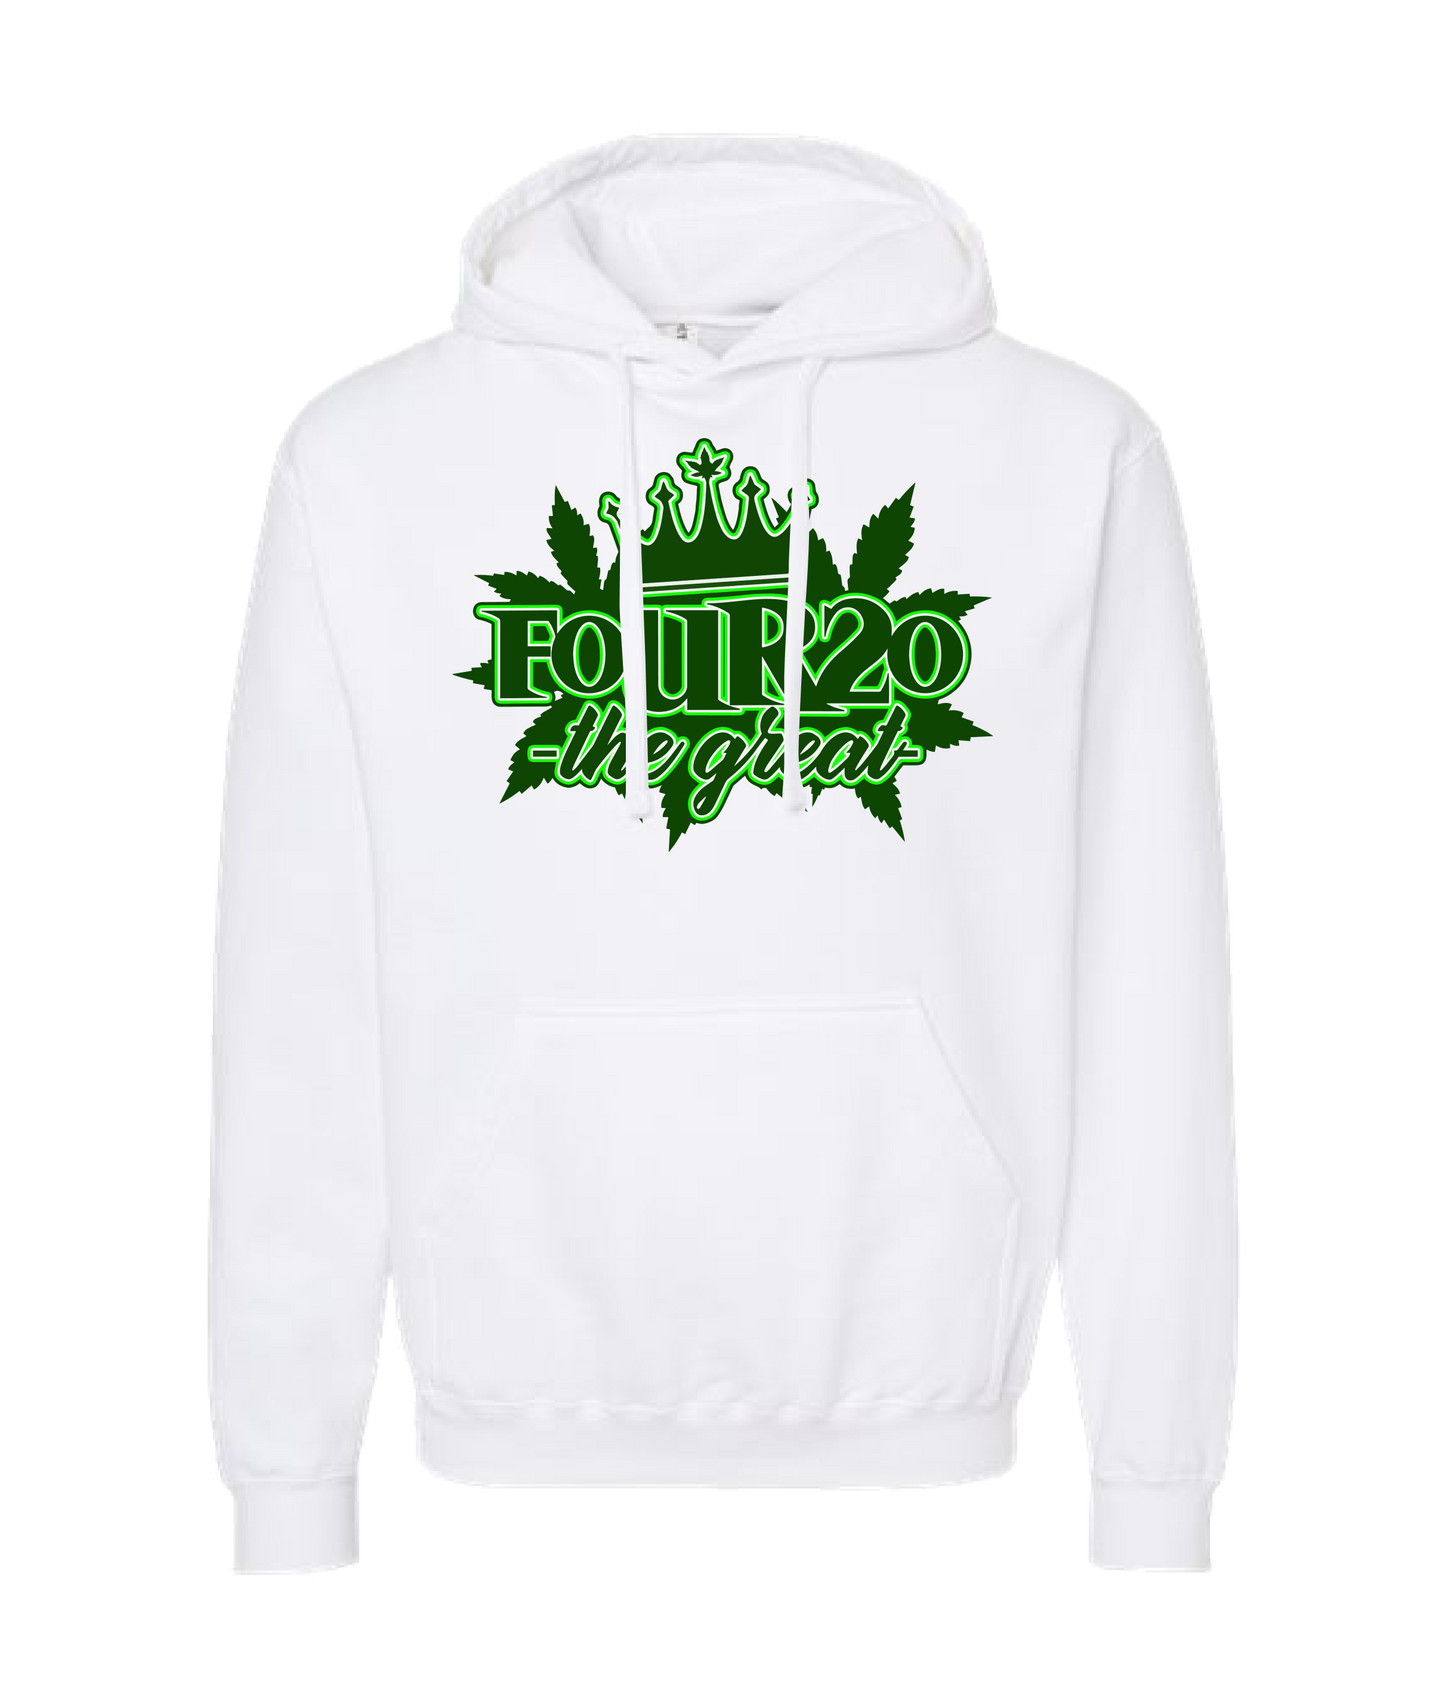 FOUR20 THE GREAT - 420TG - White Hoodie